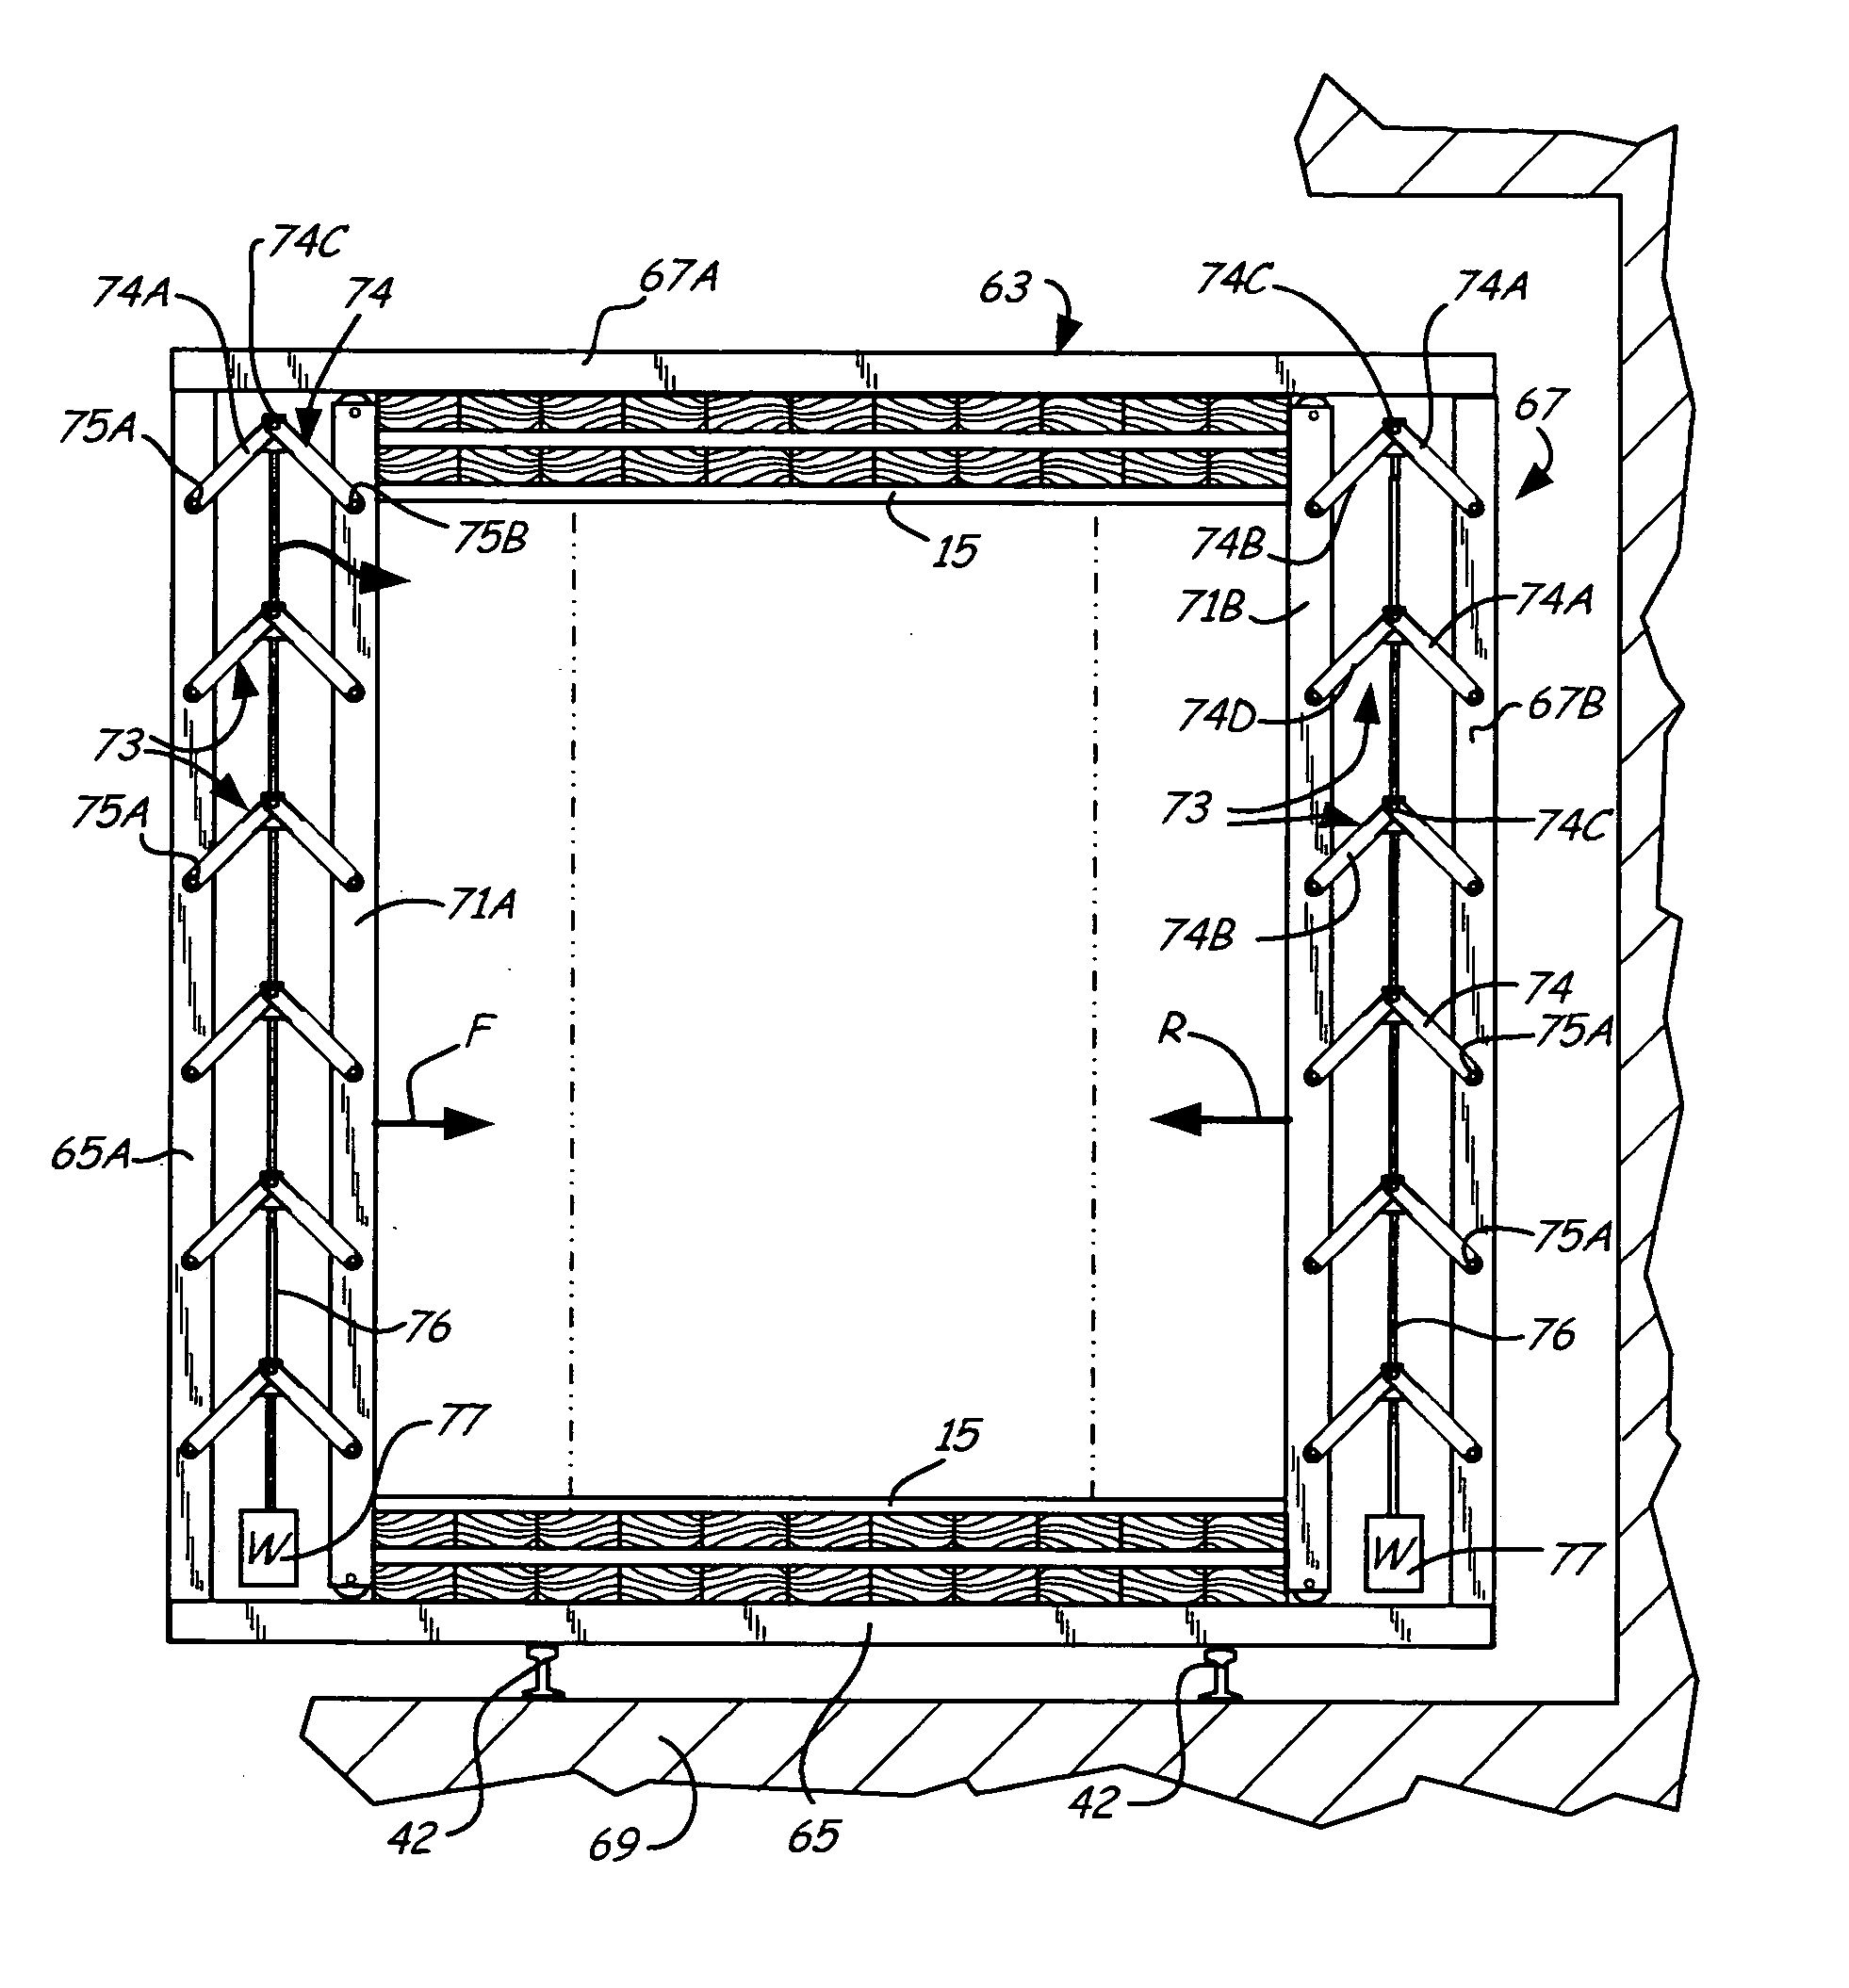 Restraining device for reducing warp in lumber during drying